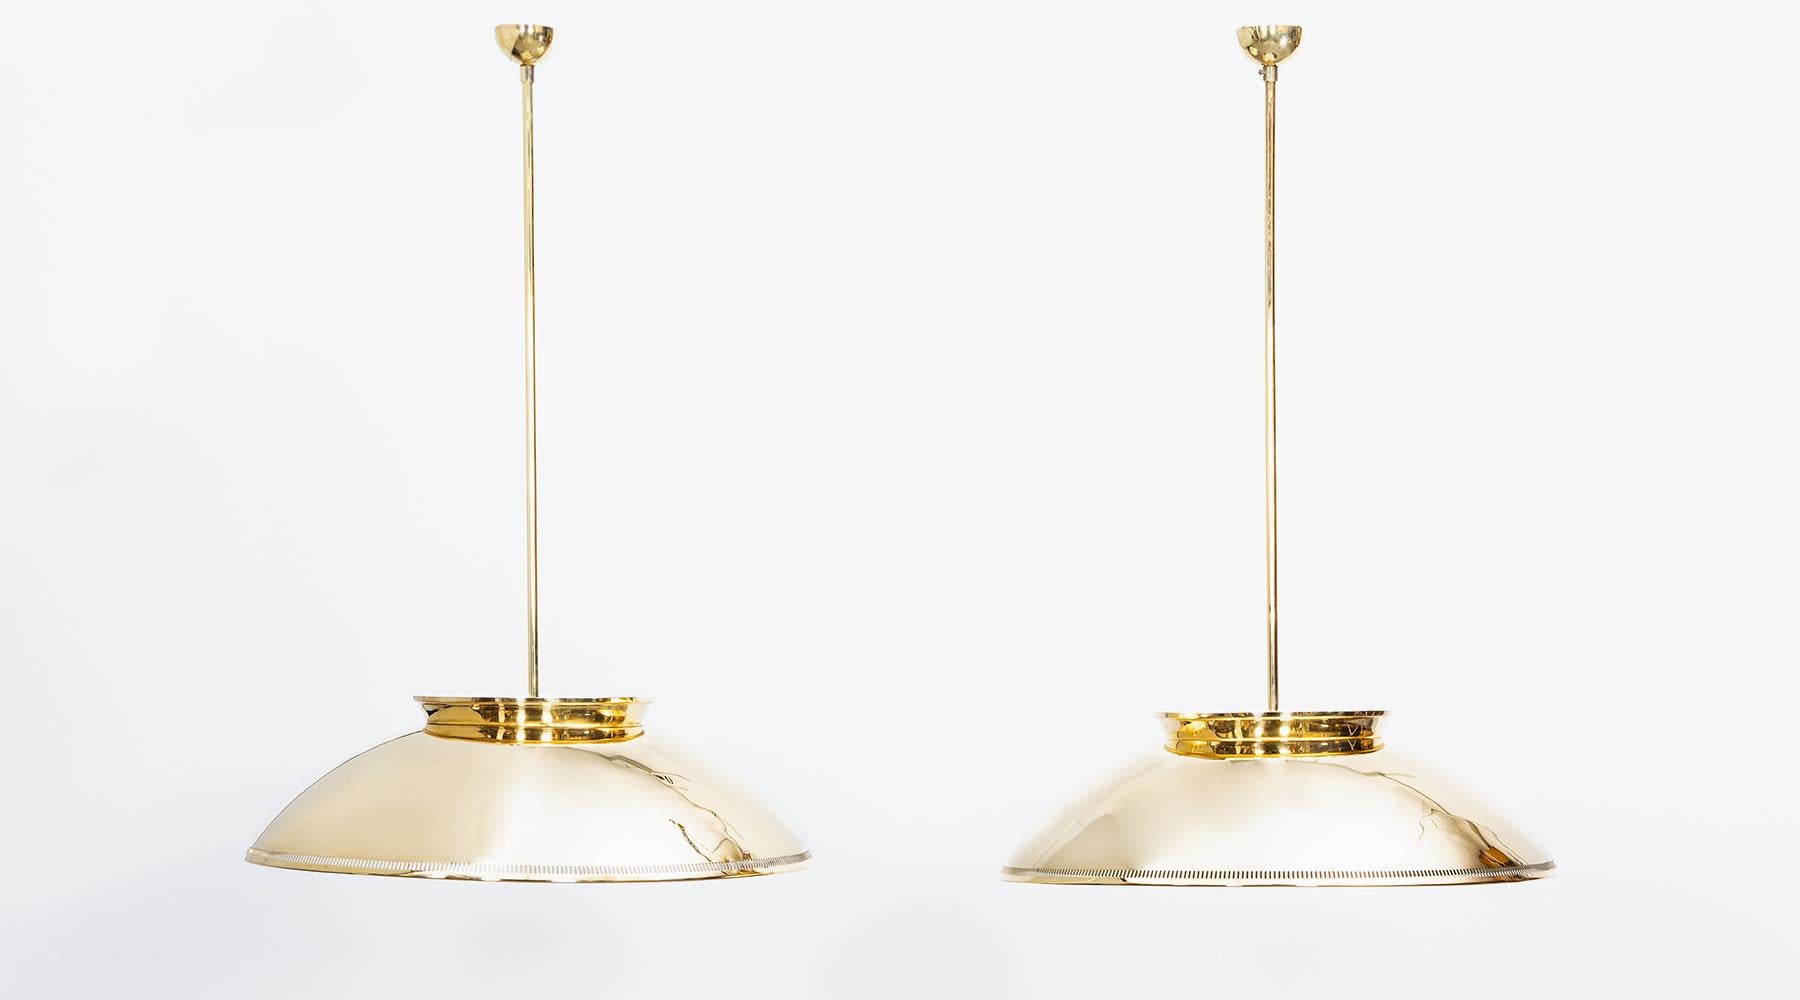 Pair of pendant lamps, brass, glass Paavo Tynell, Finland, 1950.

Fantastic set of ceiling lamps by Finland classic Paavo Tynell. His cautious hand in light design comes to full effect through this elegant yet unobtrusive set of ceiling lamp with